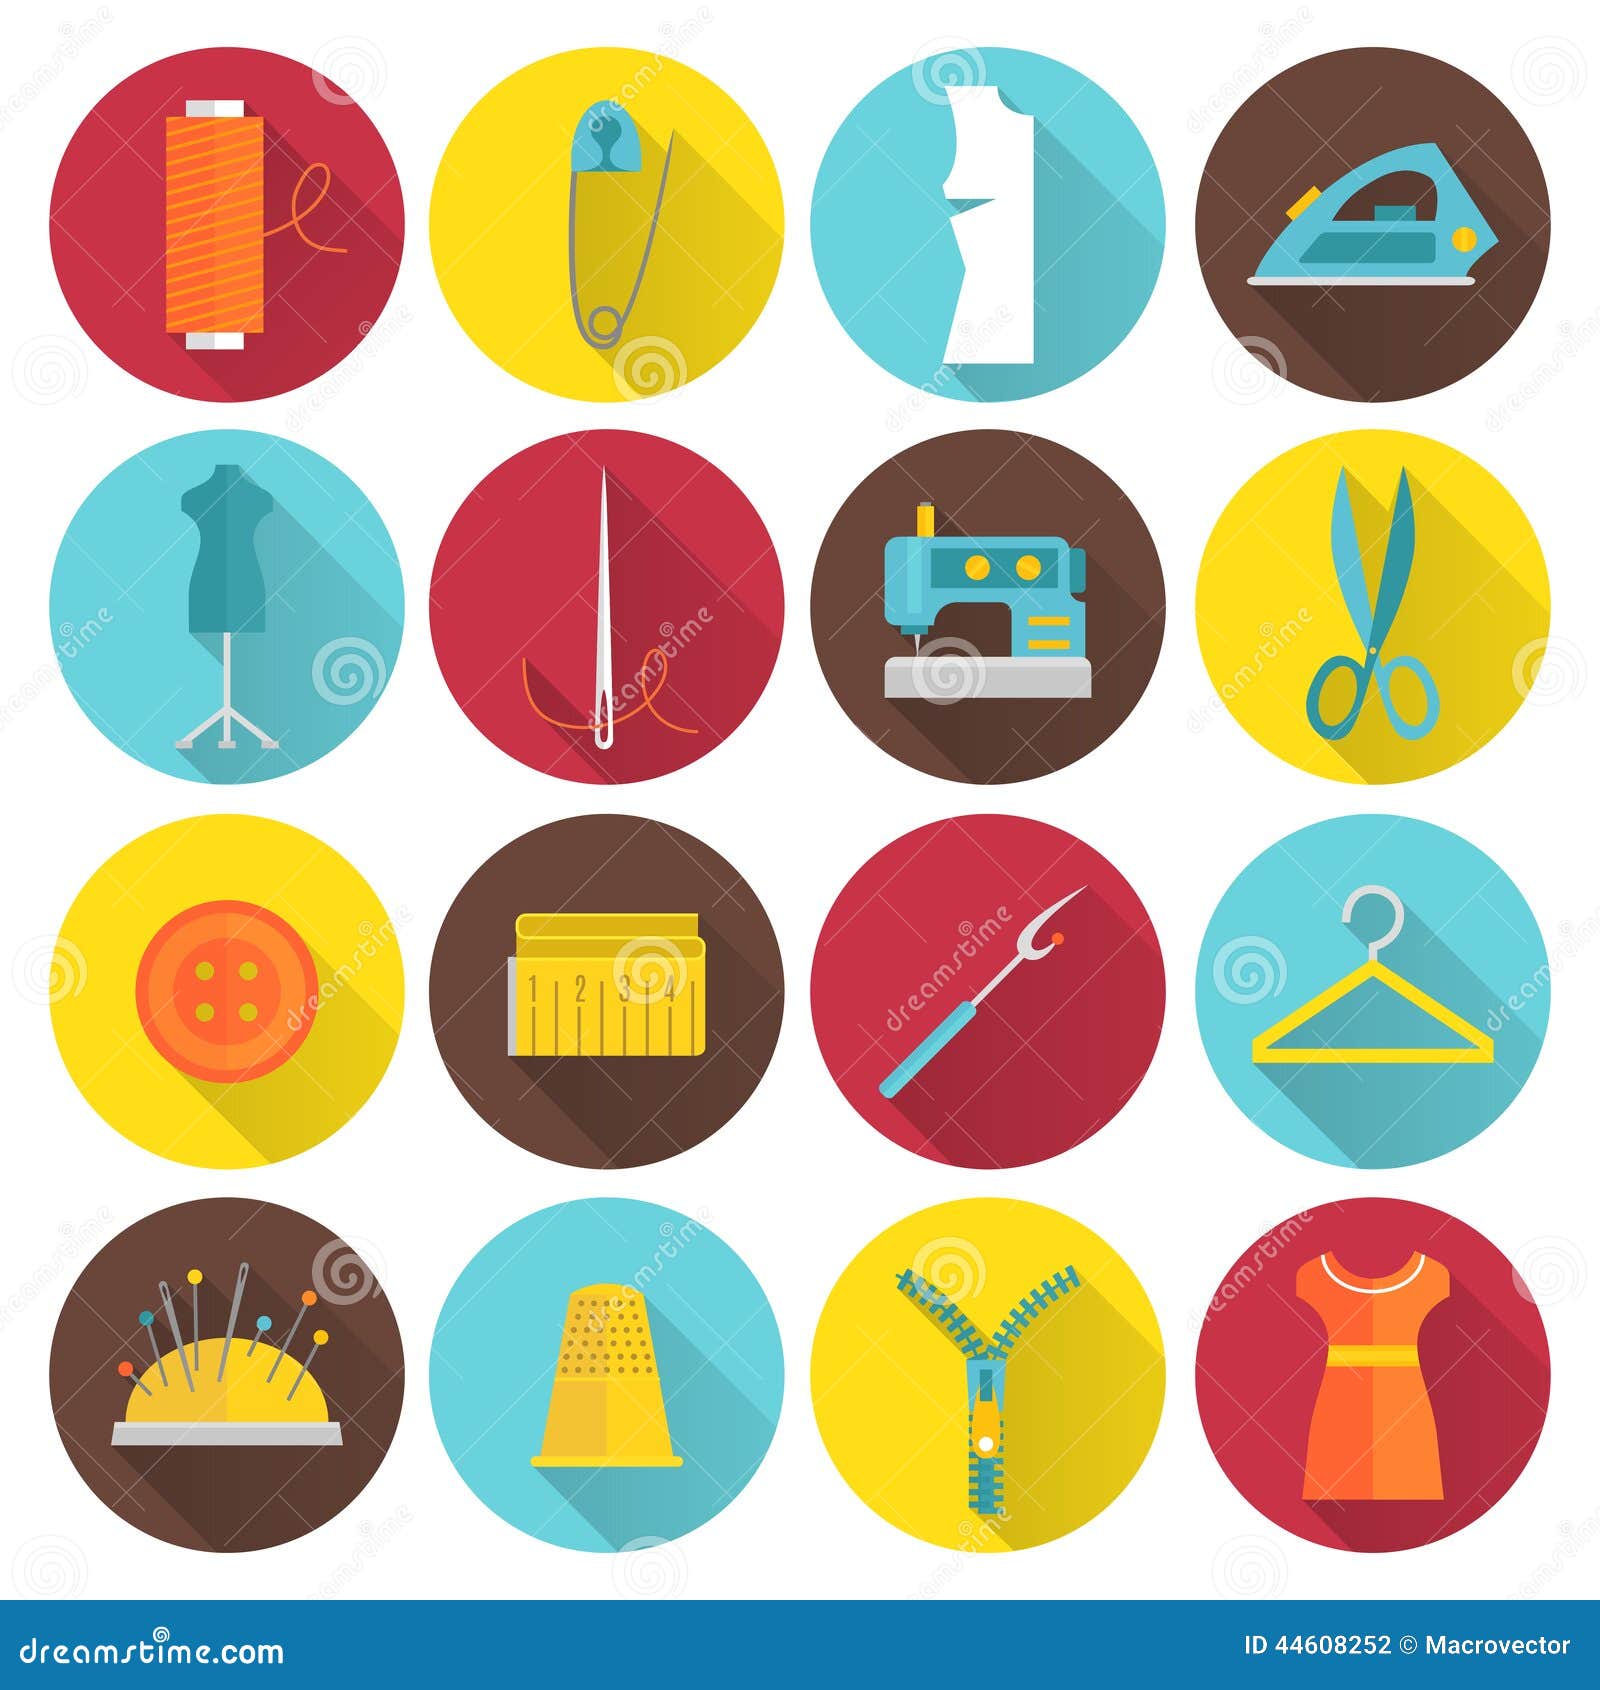 Sewing Equipment Icons stock vector. Illustration of computer - 44608252